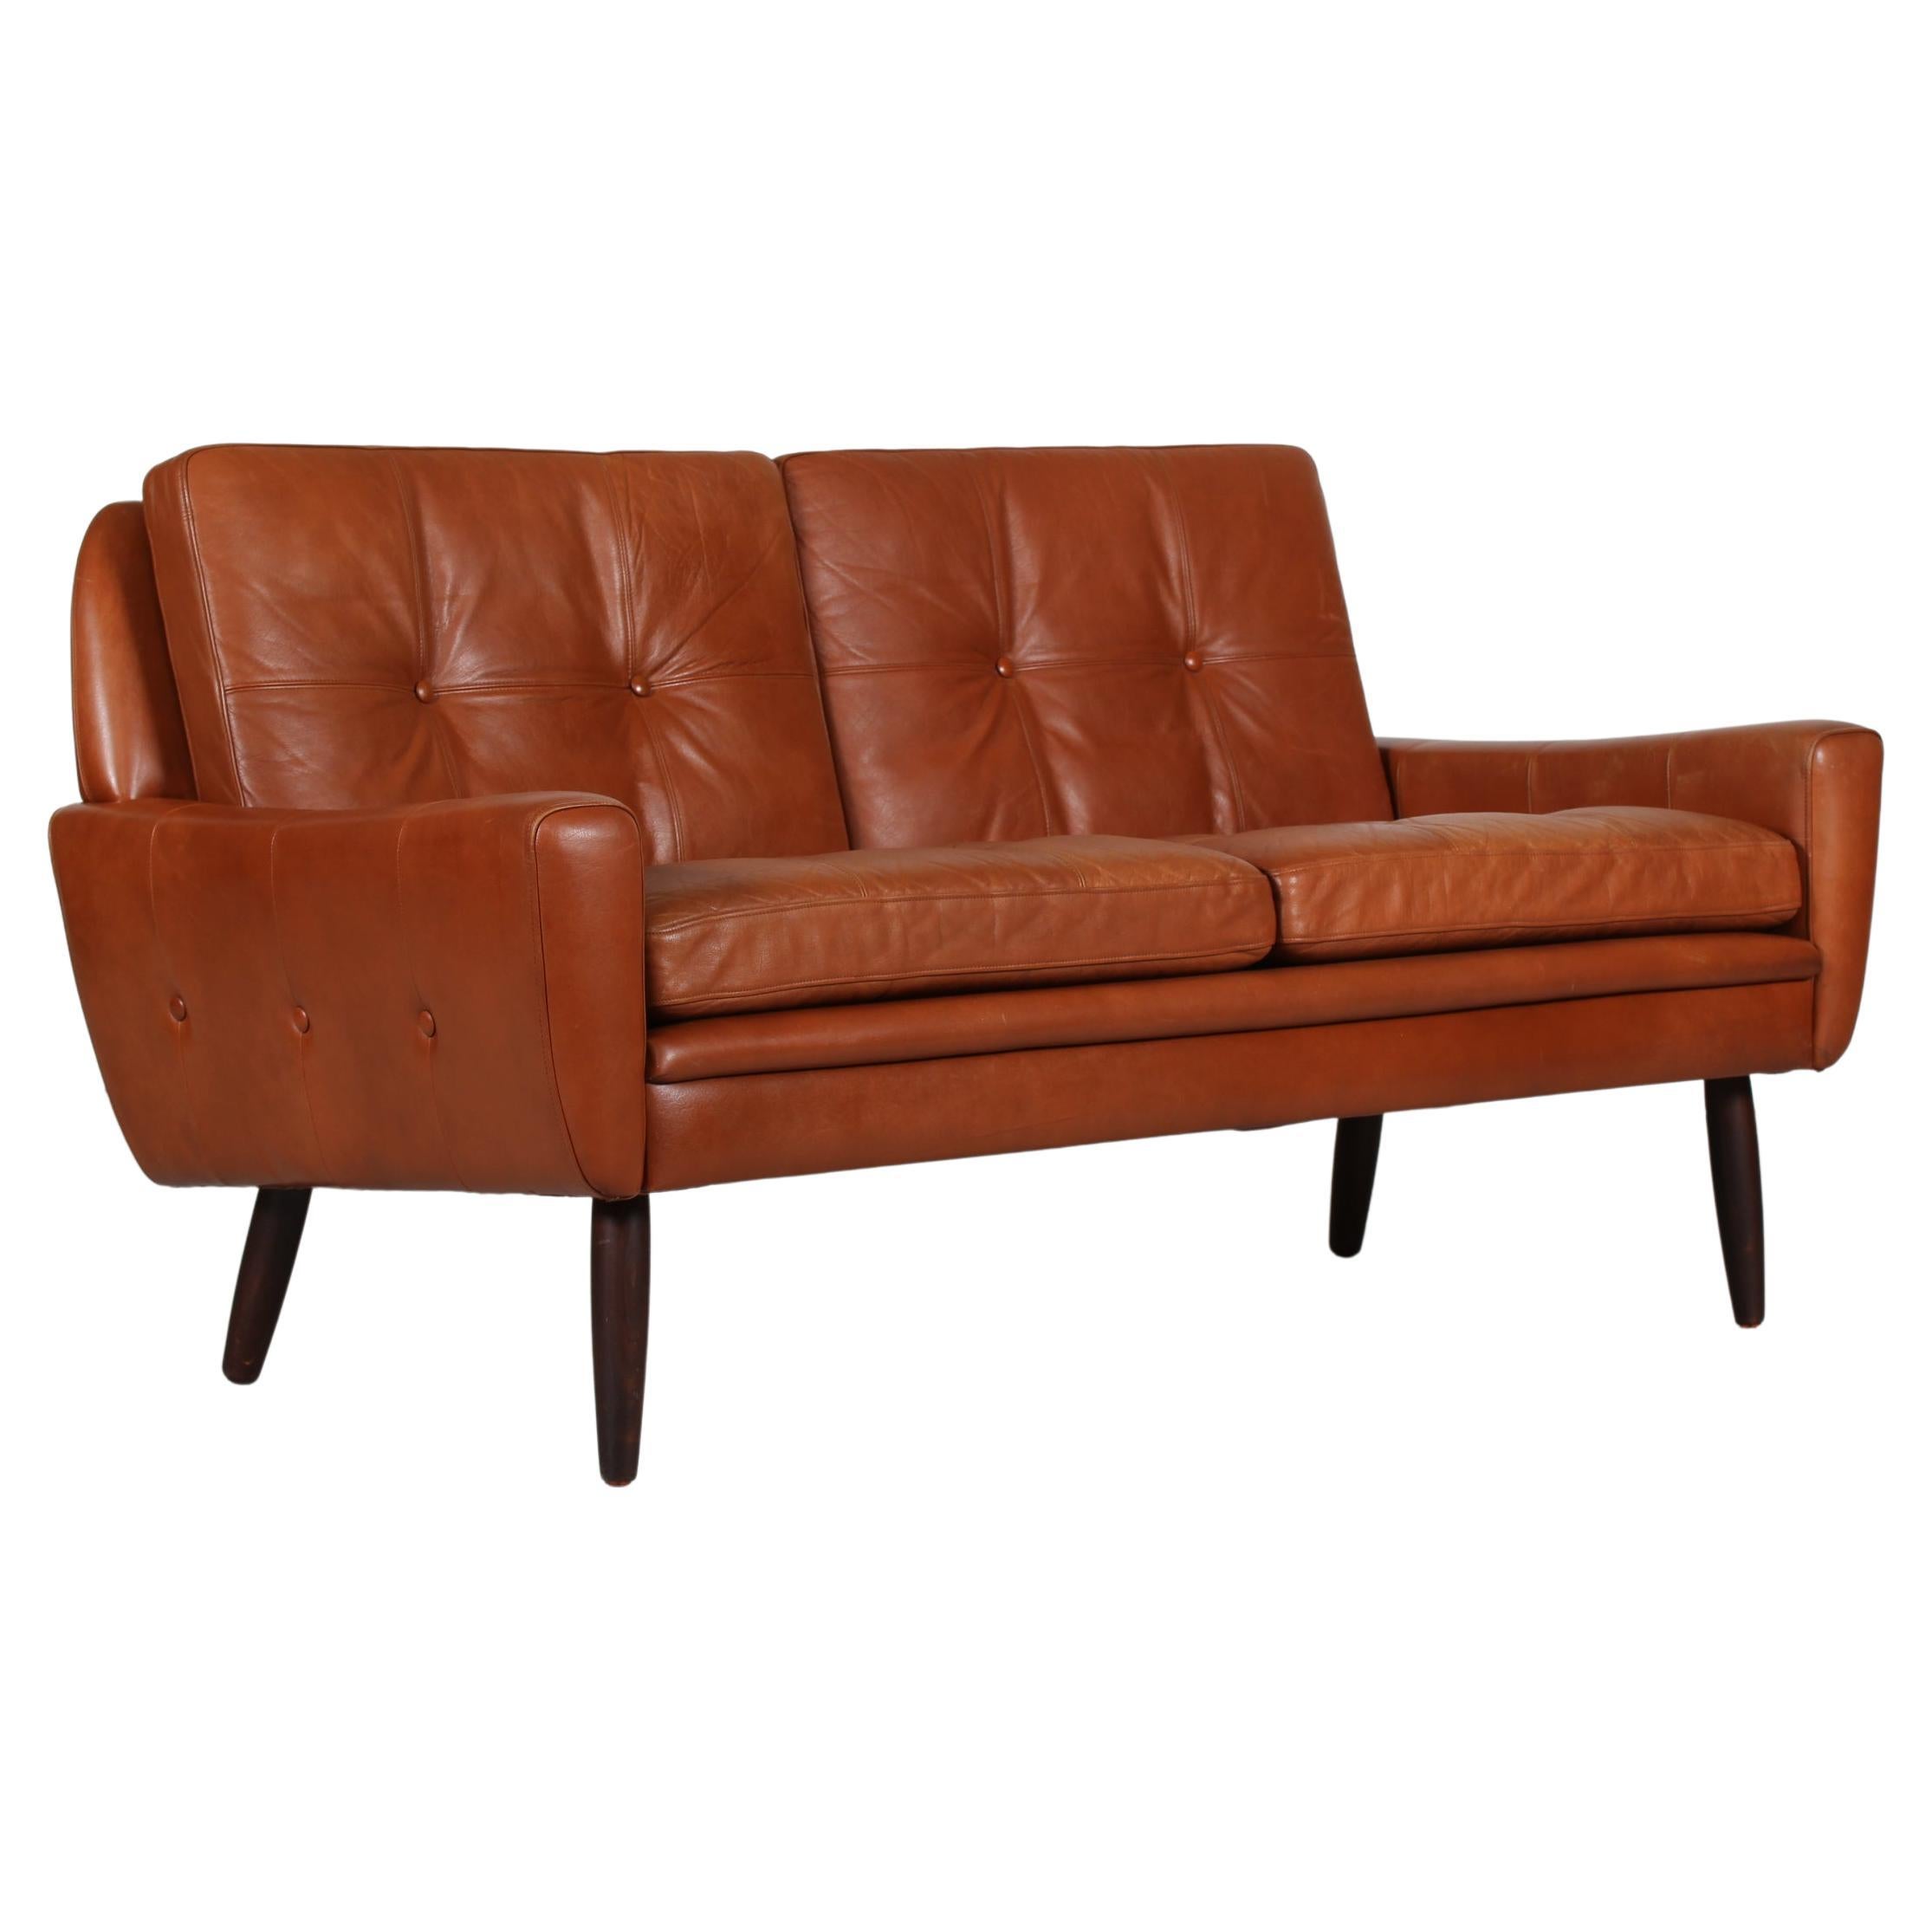 Danish Modern Two-Seat Sofa with Cognac-Colored Leather Made in Denmark 1960s For Sale